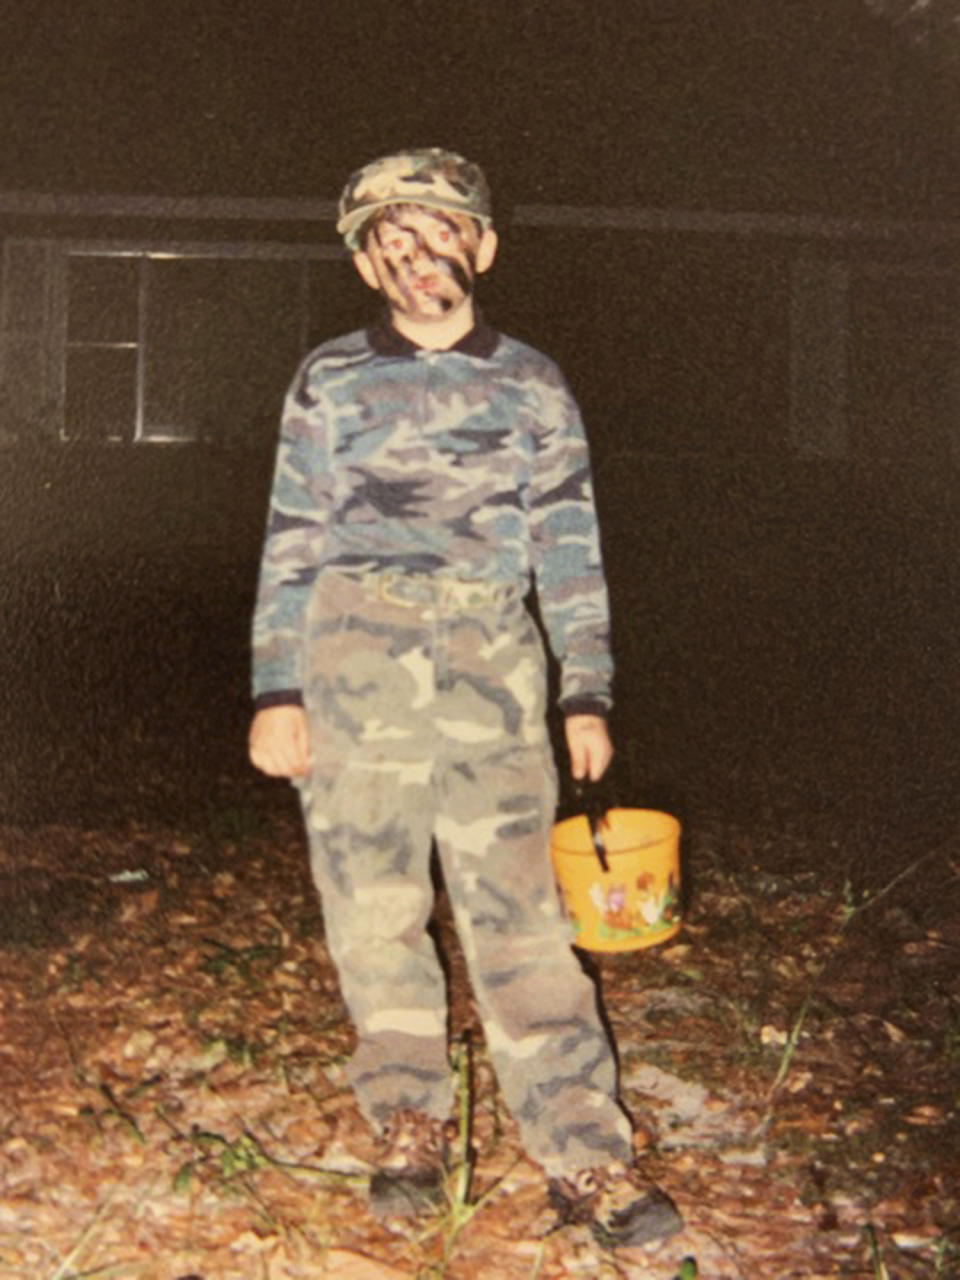 This October 2001 photo provided by Paula Kovach shows her nephew, James Johnston as a boy dressed in camouflage for Halloween in Nacogdoches, Texas. As a toddler, Johnston liked to play in the triple-degree Texas summers in cargo shorts and heavy-duty camouflage, digging foxholes in his front yard. His mother, Meghan Billiot, recalls he once asked to have a toy driver’s license created for him with the designation “Special Forces” and code name Silver Falcon. (Paula Kovach via AP)